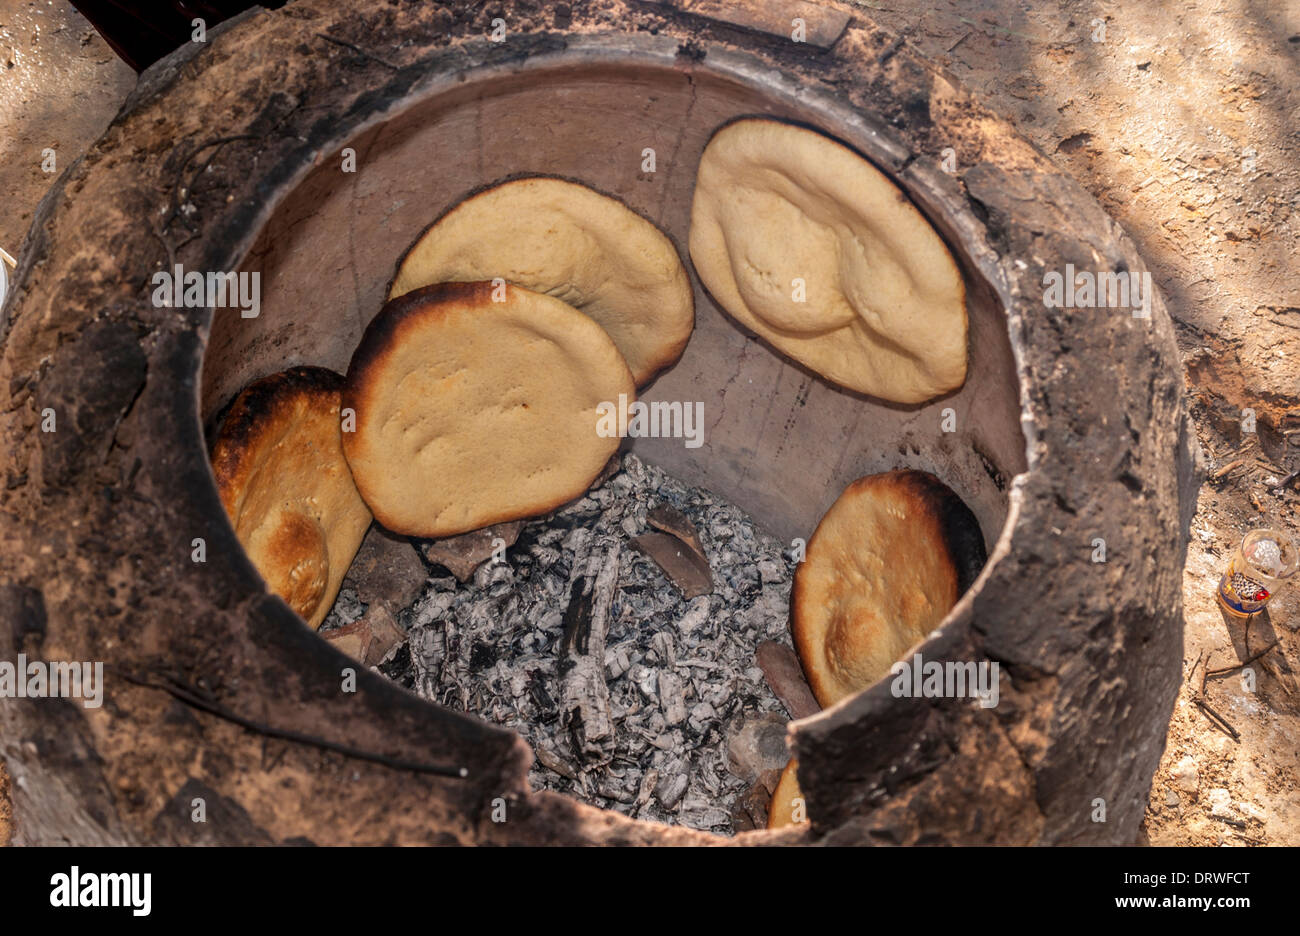 Flatbreads cooking on inside walls of an outdoor Tandoor oven, Tunisia. Stock Photo